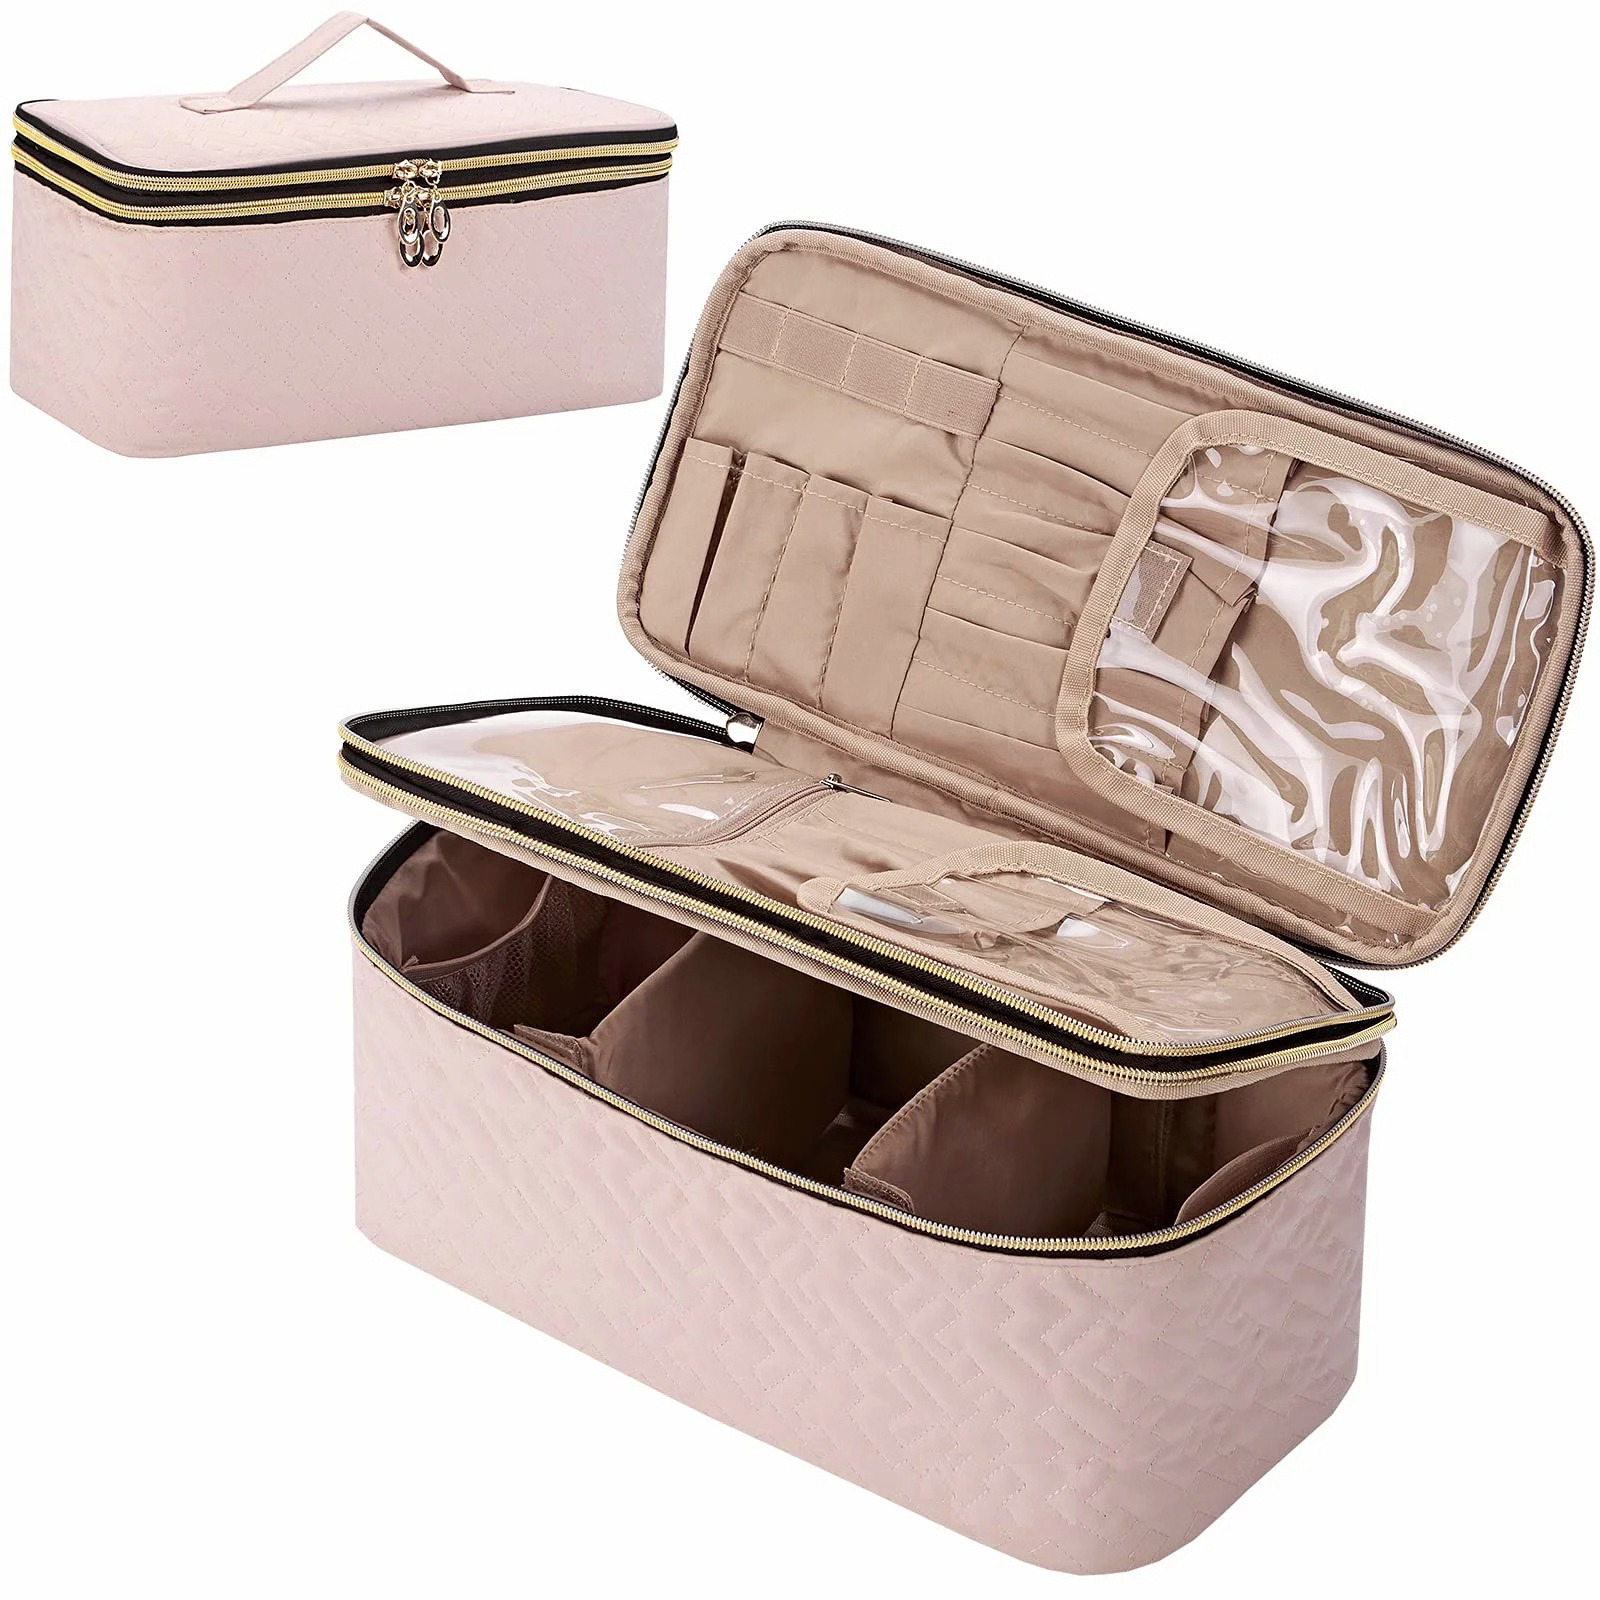 Double Layer Large Toiletry Bag With Compartments